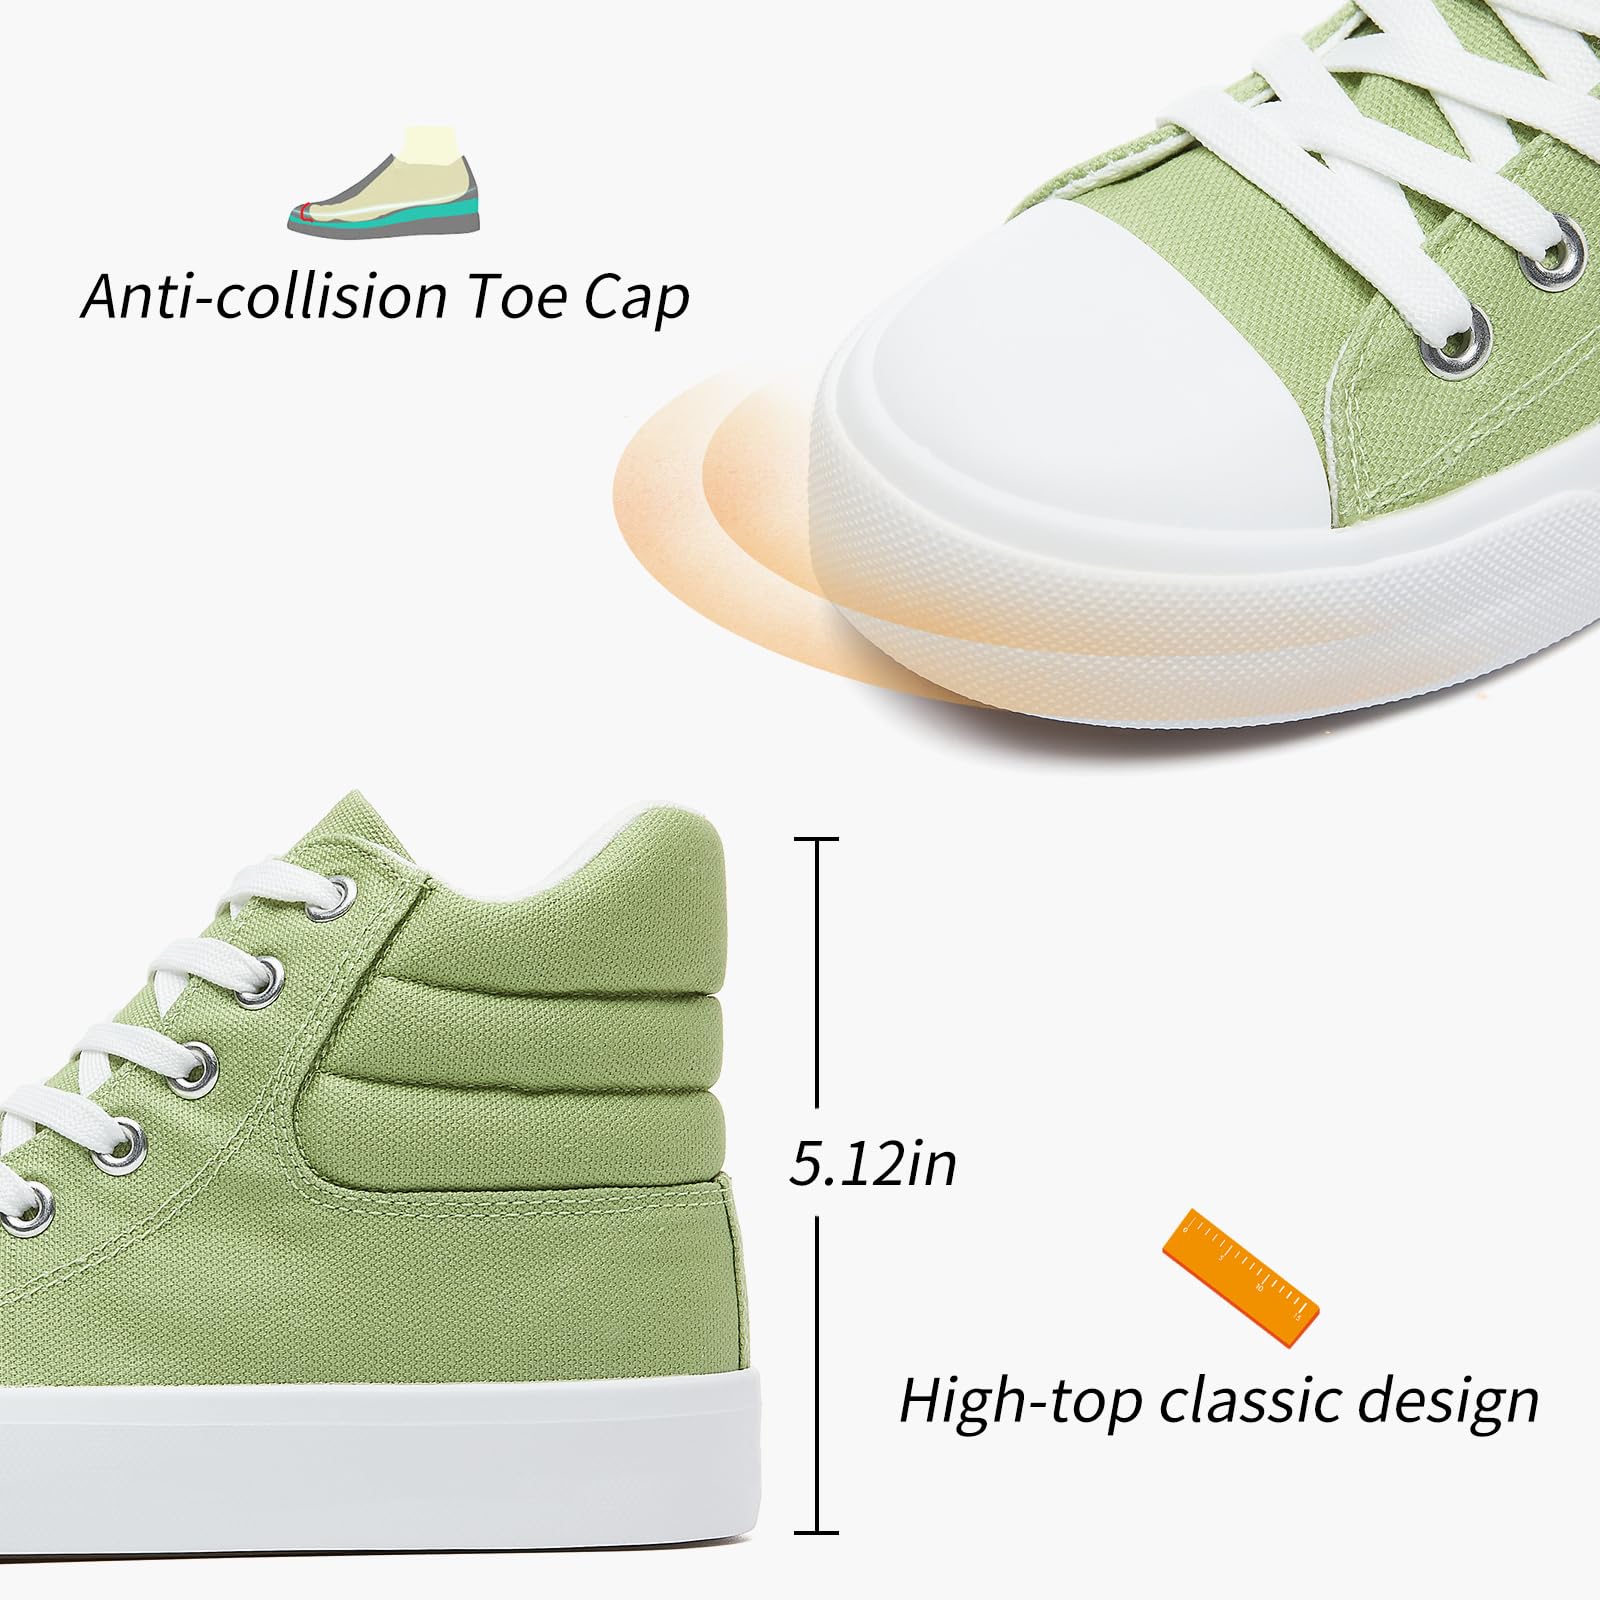 High Top Sneakers for Women White Womens High Tops Canvas Shoes Black Fashion Sneakers Casual Lace up Tennis Shoes (Green,US08)